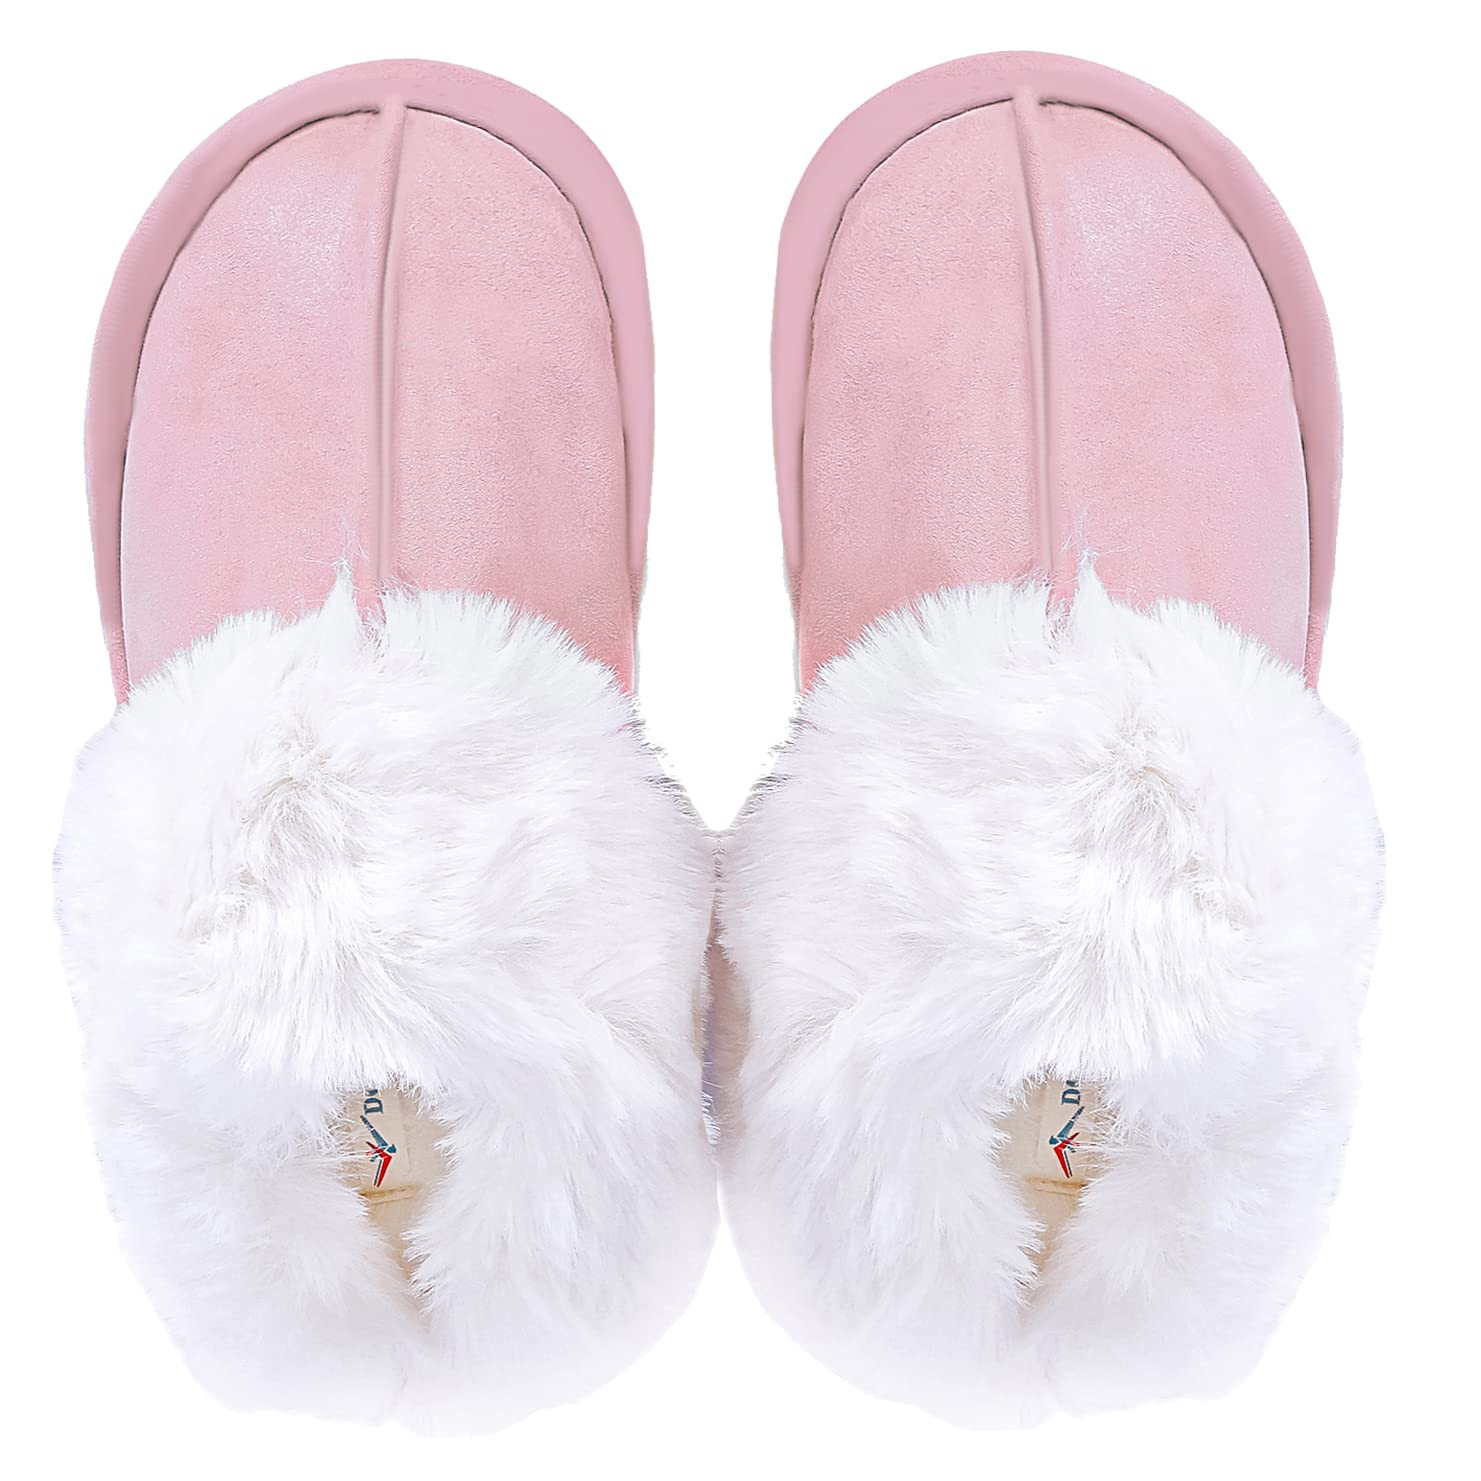 Slippers - Buy Slippers Online in India| Myntra